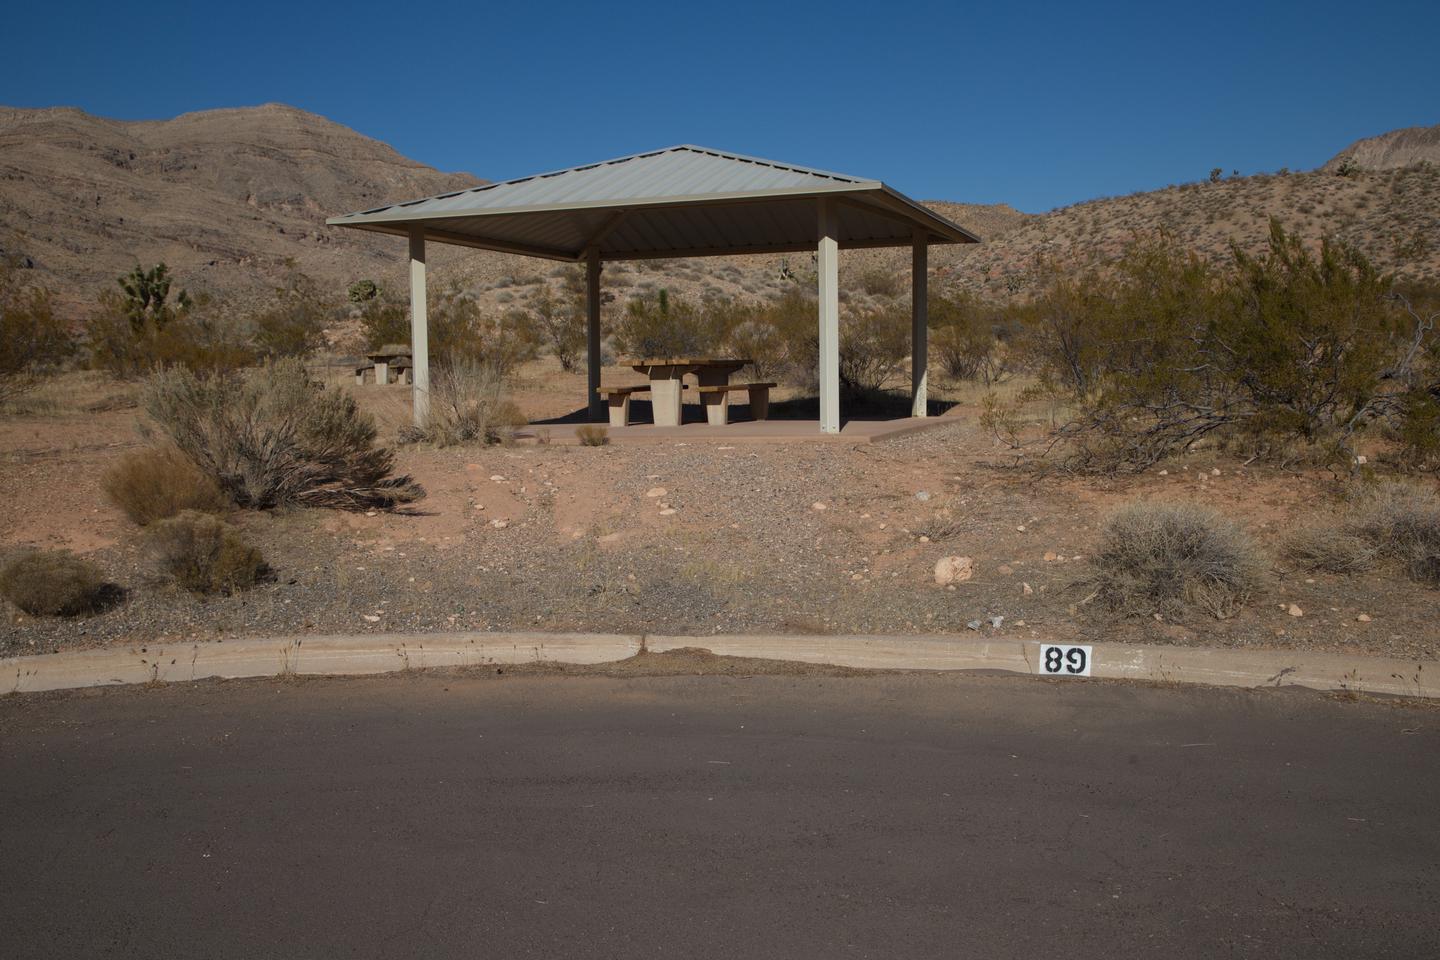 Site 89Site 89 - Site has shade structure, fire pit, plenty of flat tent spots, and a large RV parking. The site has slight slope to reach shade structure.